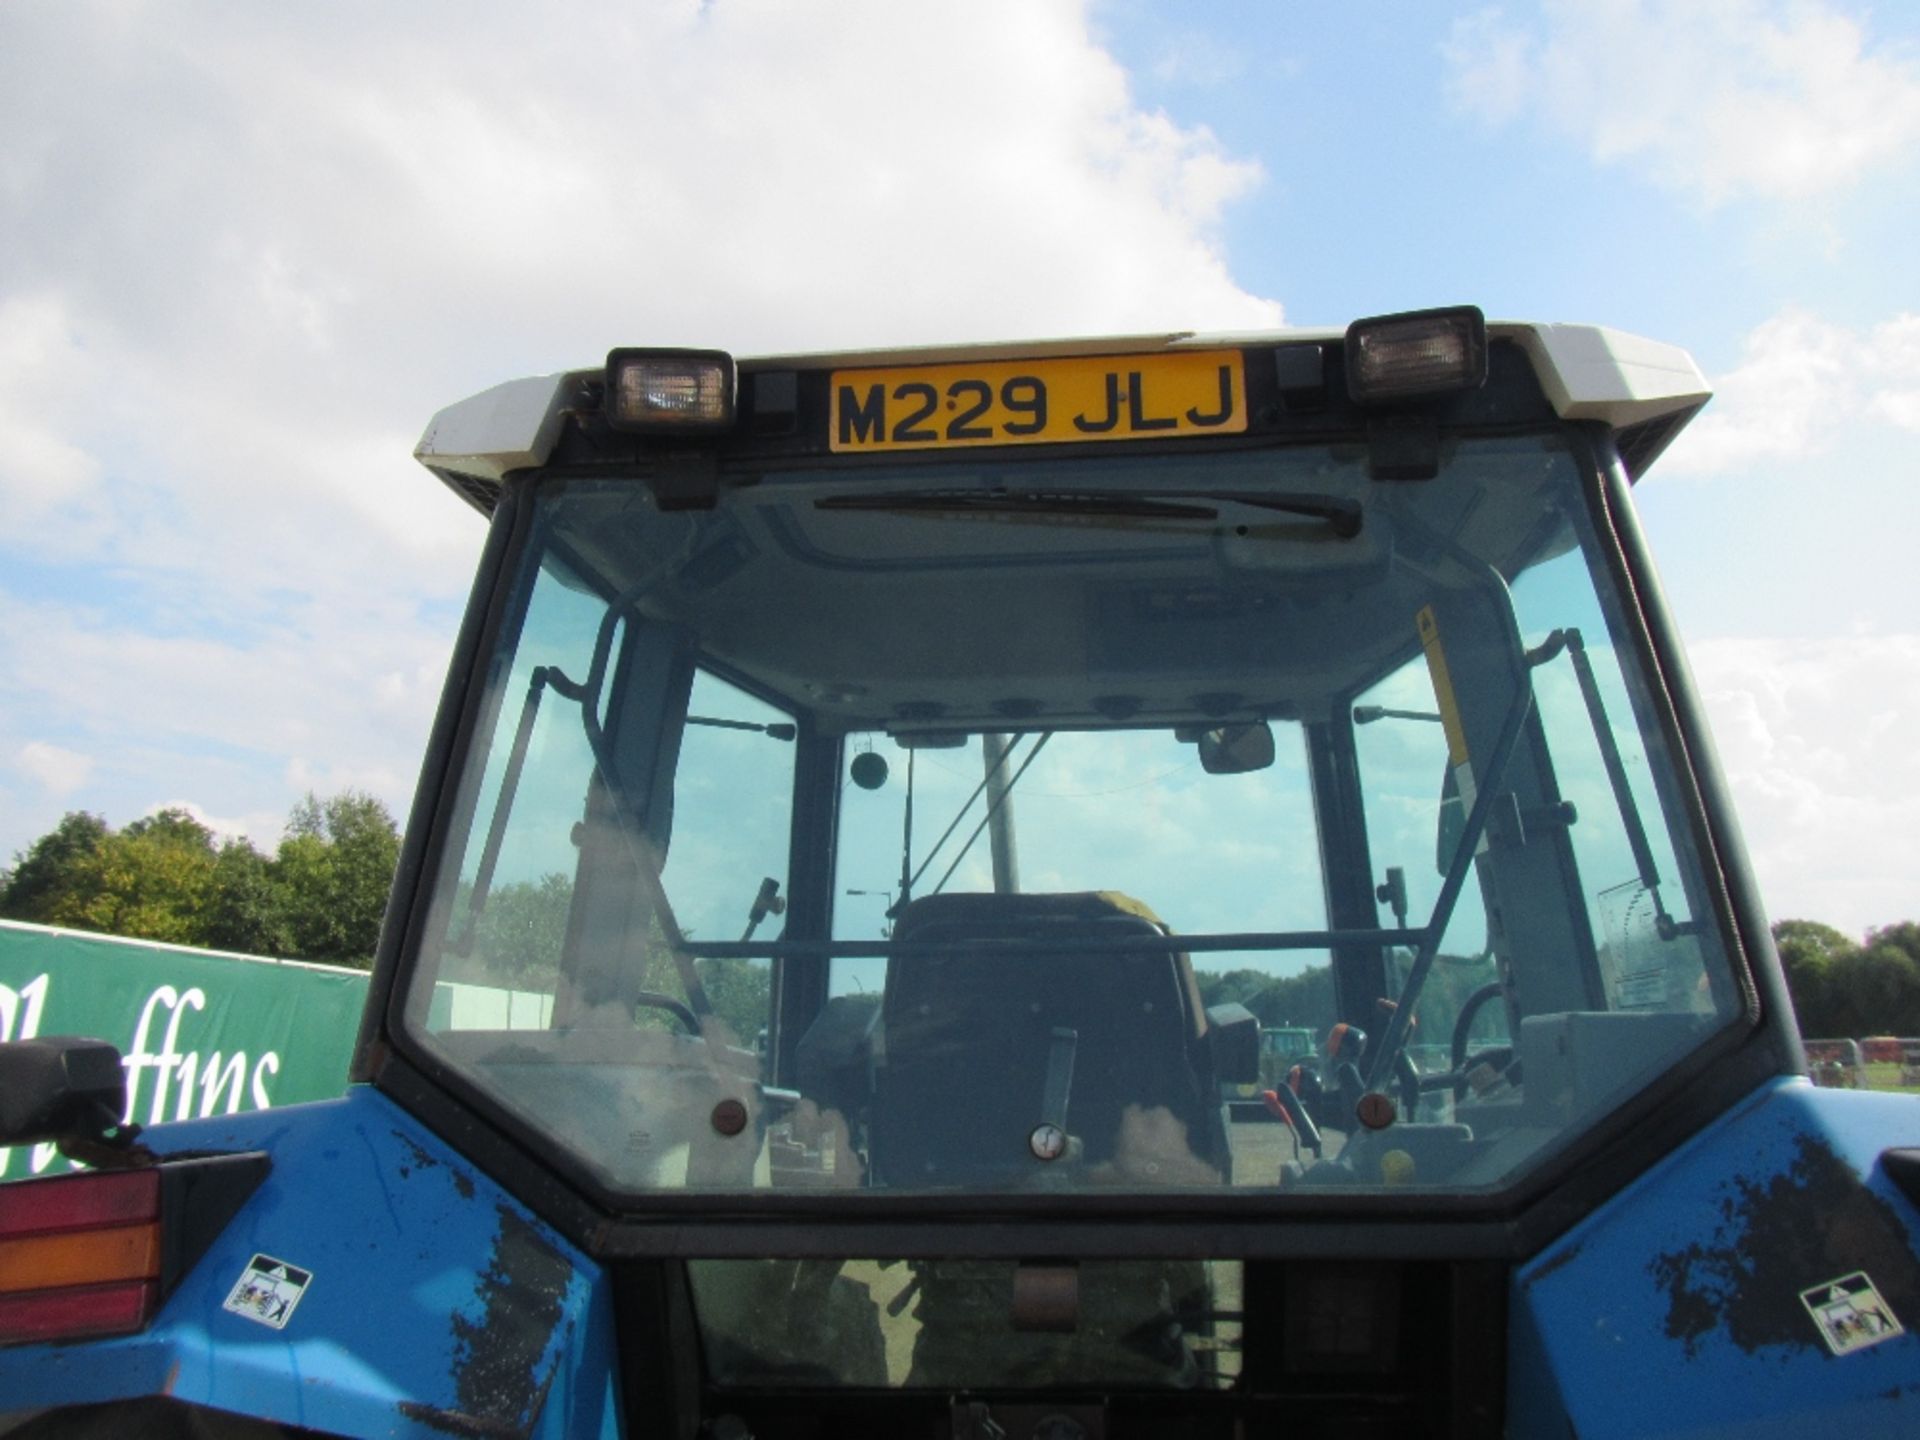 Ford New Holland 8340 SLE 40k Tractor with Air Con. Reg. No. M229 JLJ Ser No BD85370 - Image 8 of 17